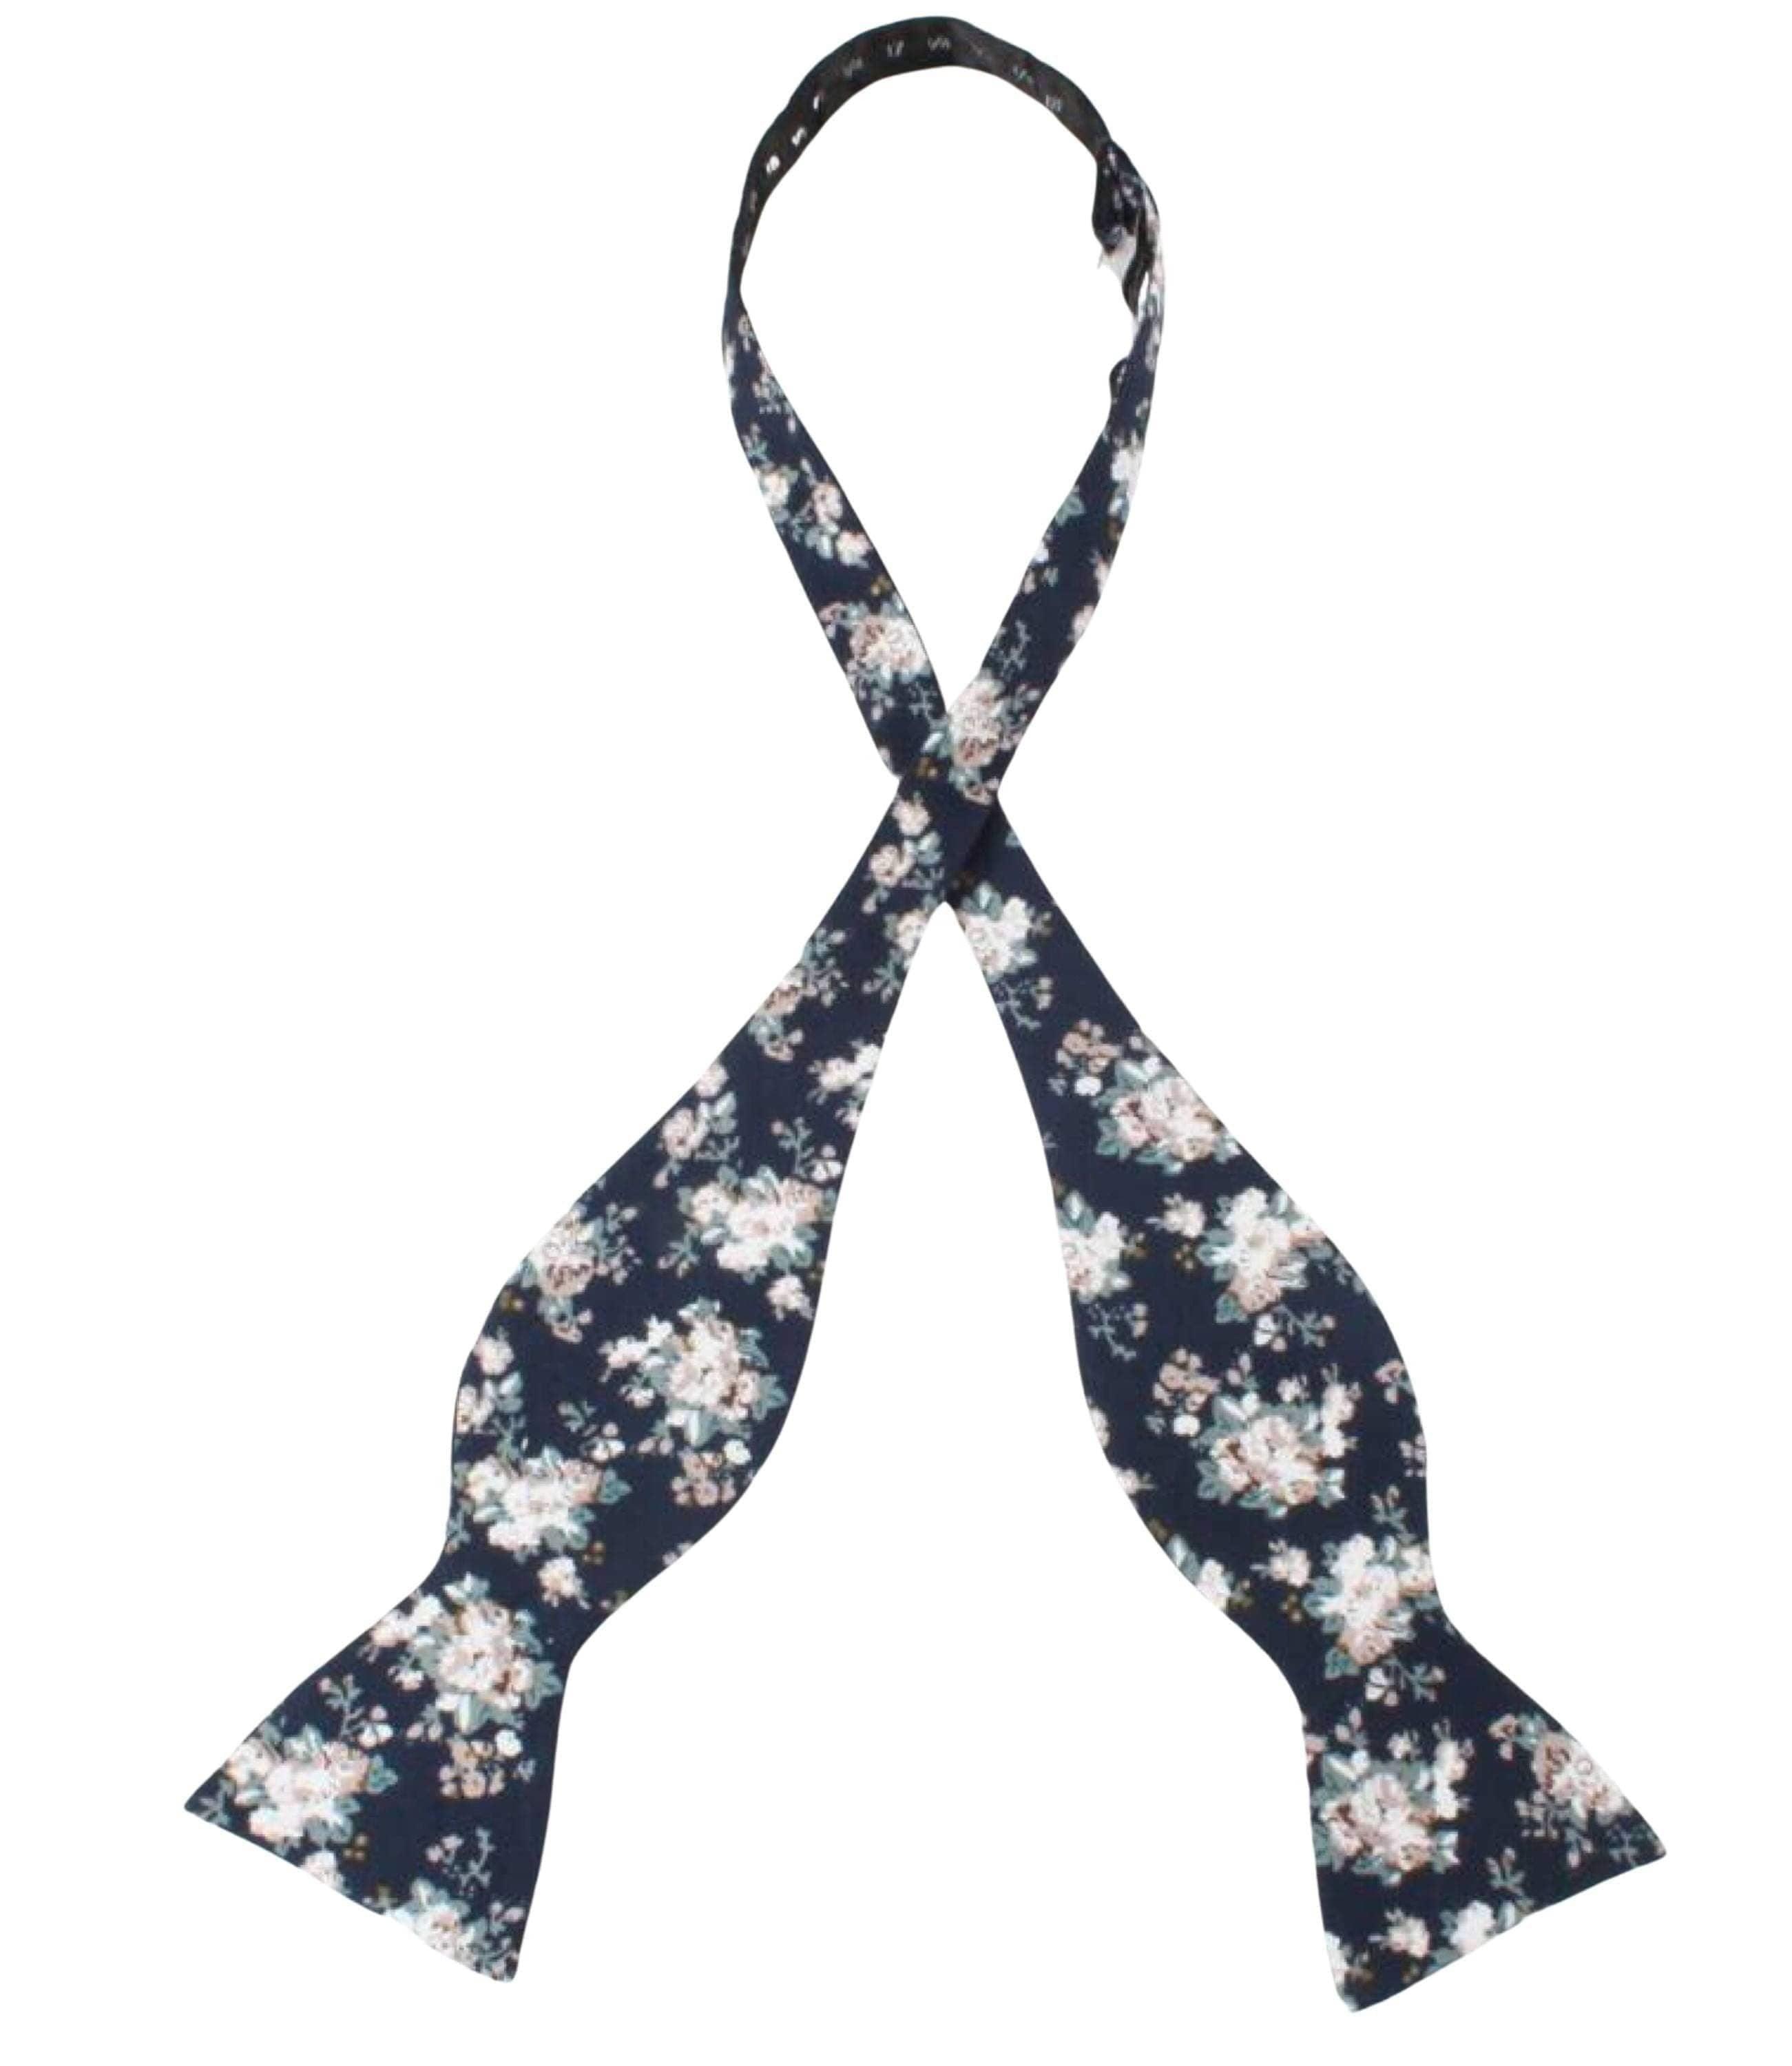 Navy Floral Bow Tie Self Tie FINLEY - MYTIESHOP Blue-Navy Floral Bow Tie 100% Cotton Flannel Handmade Adjustable to fit most neck sizes 13 3/4&quot; - 18&quot; Elevate your style and make a statement with this navy blue bow tie. With a versatile navy color and blue floral print, this bow tie is perfect for any formal event. Grooms, weddings, and formal affairs come to mind - but this bow tie can be dressed down for a more relaxed look as well. With a self-tie design, this bow tie is easy to put on and tak